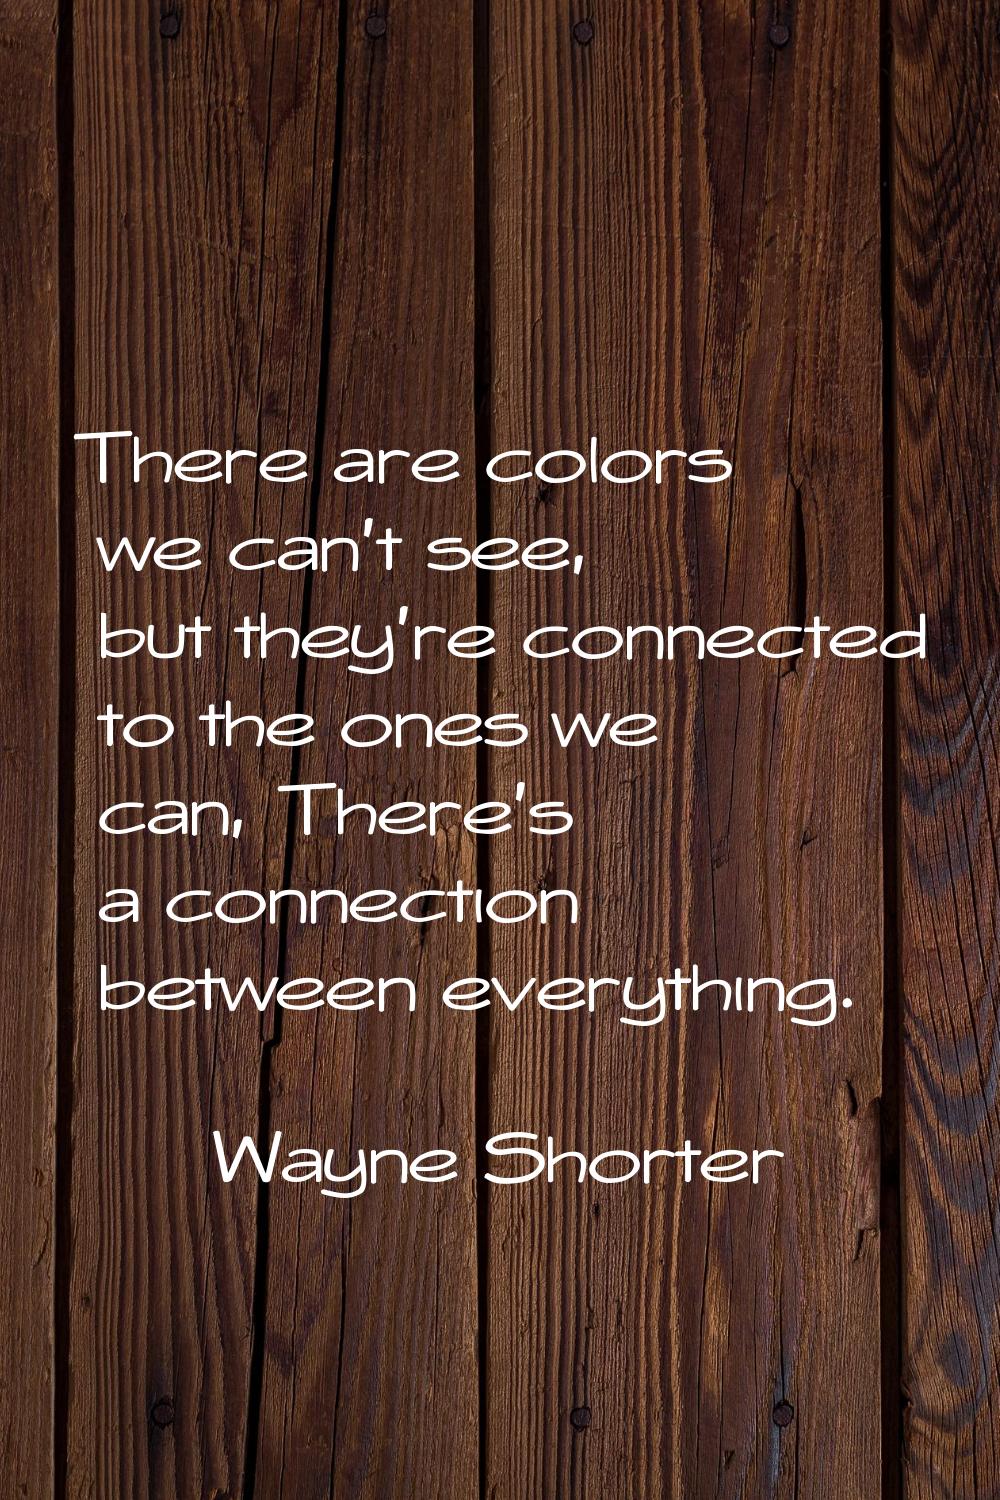 There are colors we can't see, but they're connected to the ones we can, There's a connection betwe